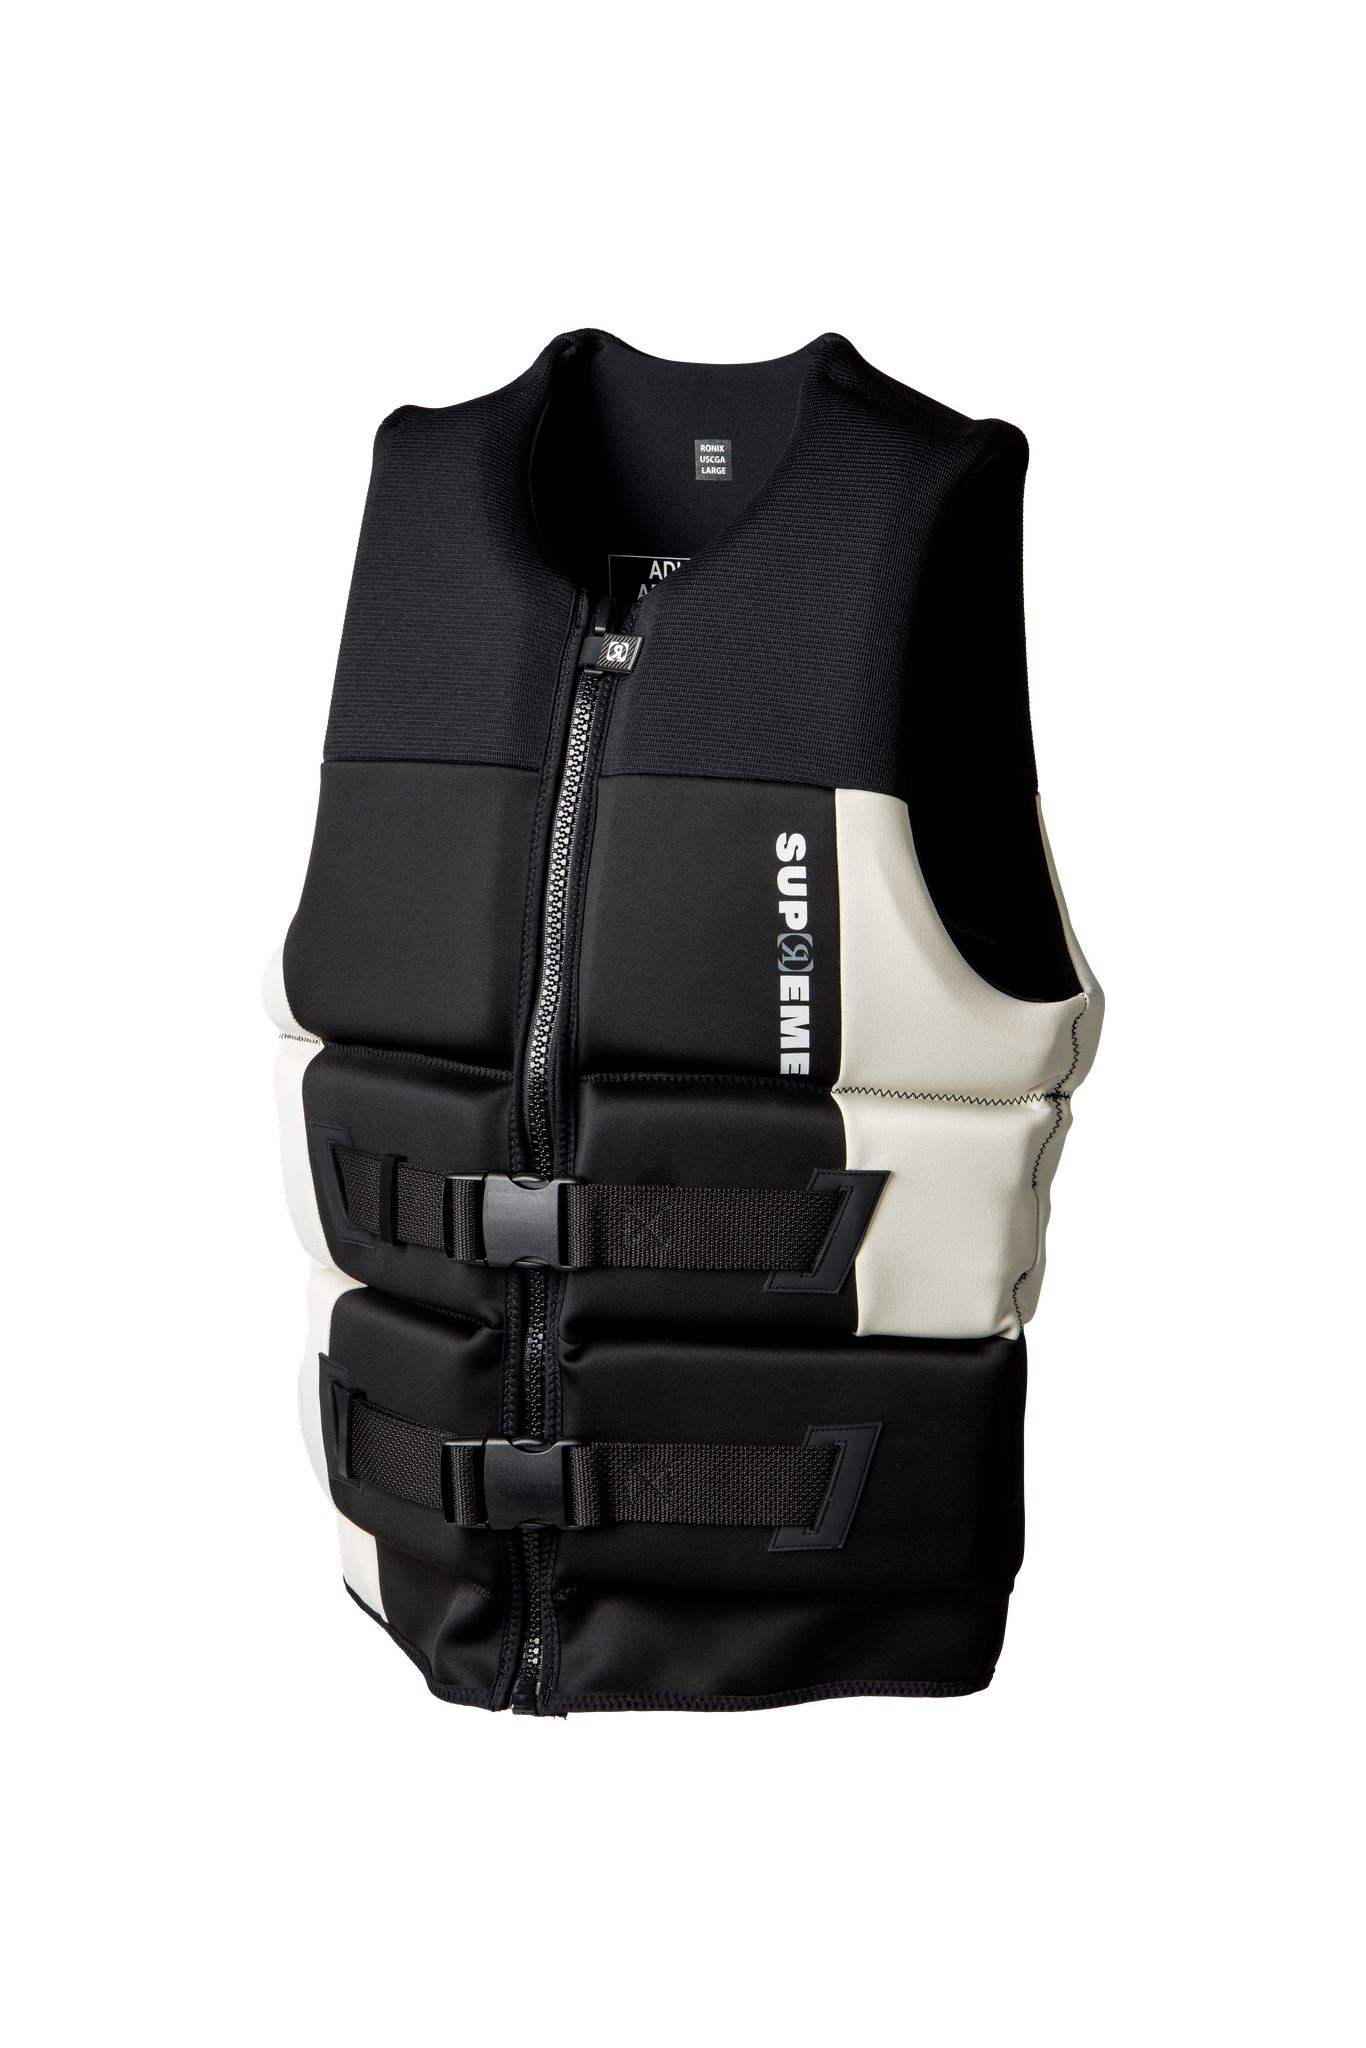 A Ronix 2024 Supreme Yes Men's CGA Vest in black and white, providing buoyancy and mobility on a black background.